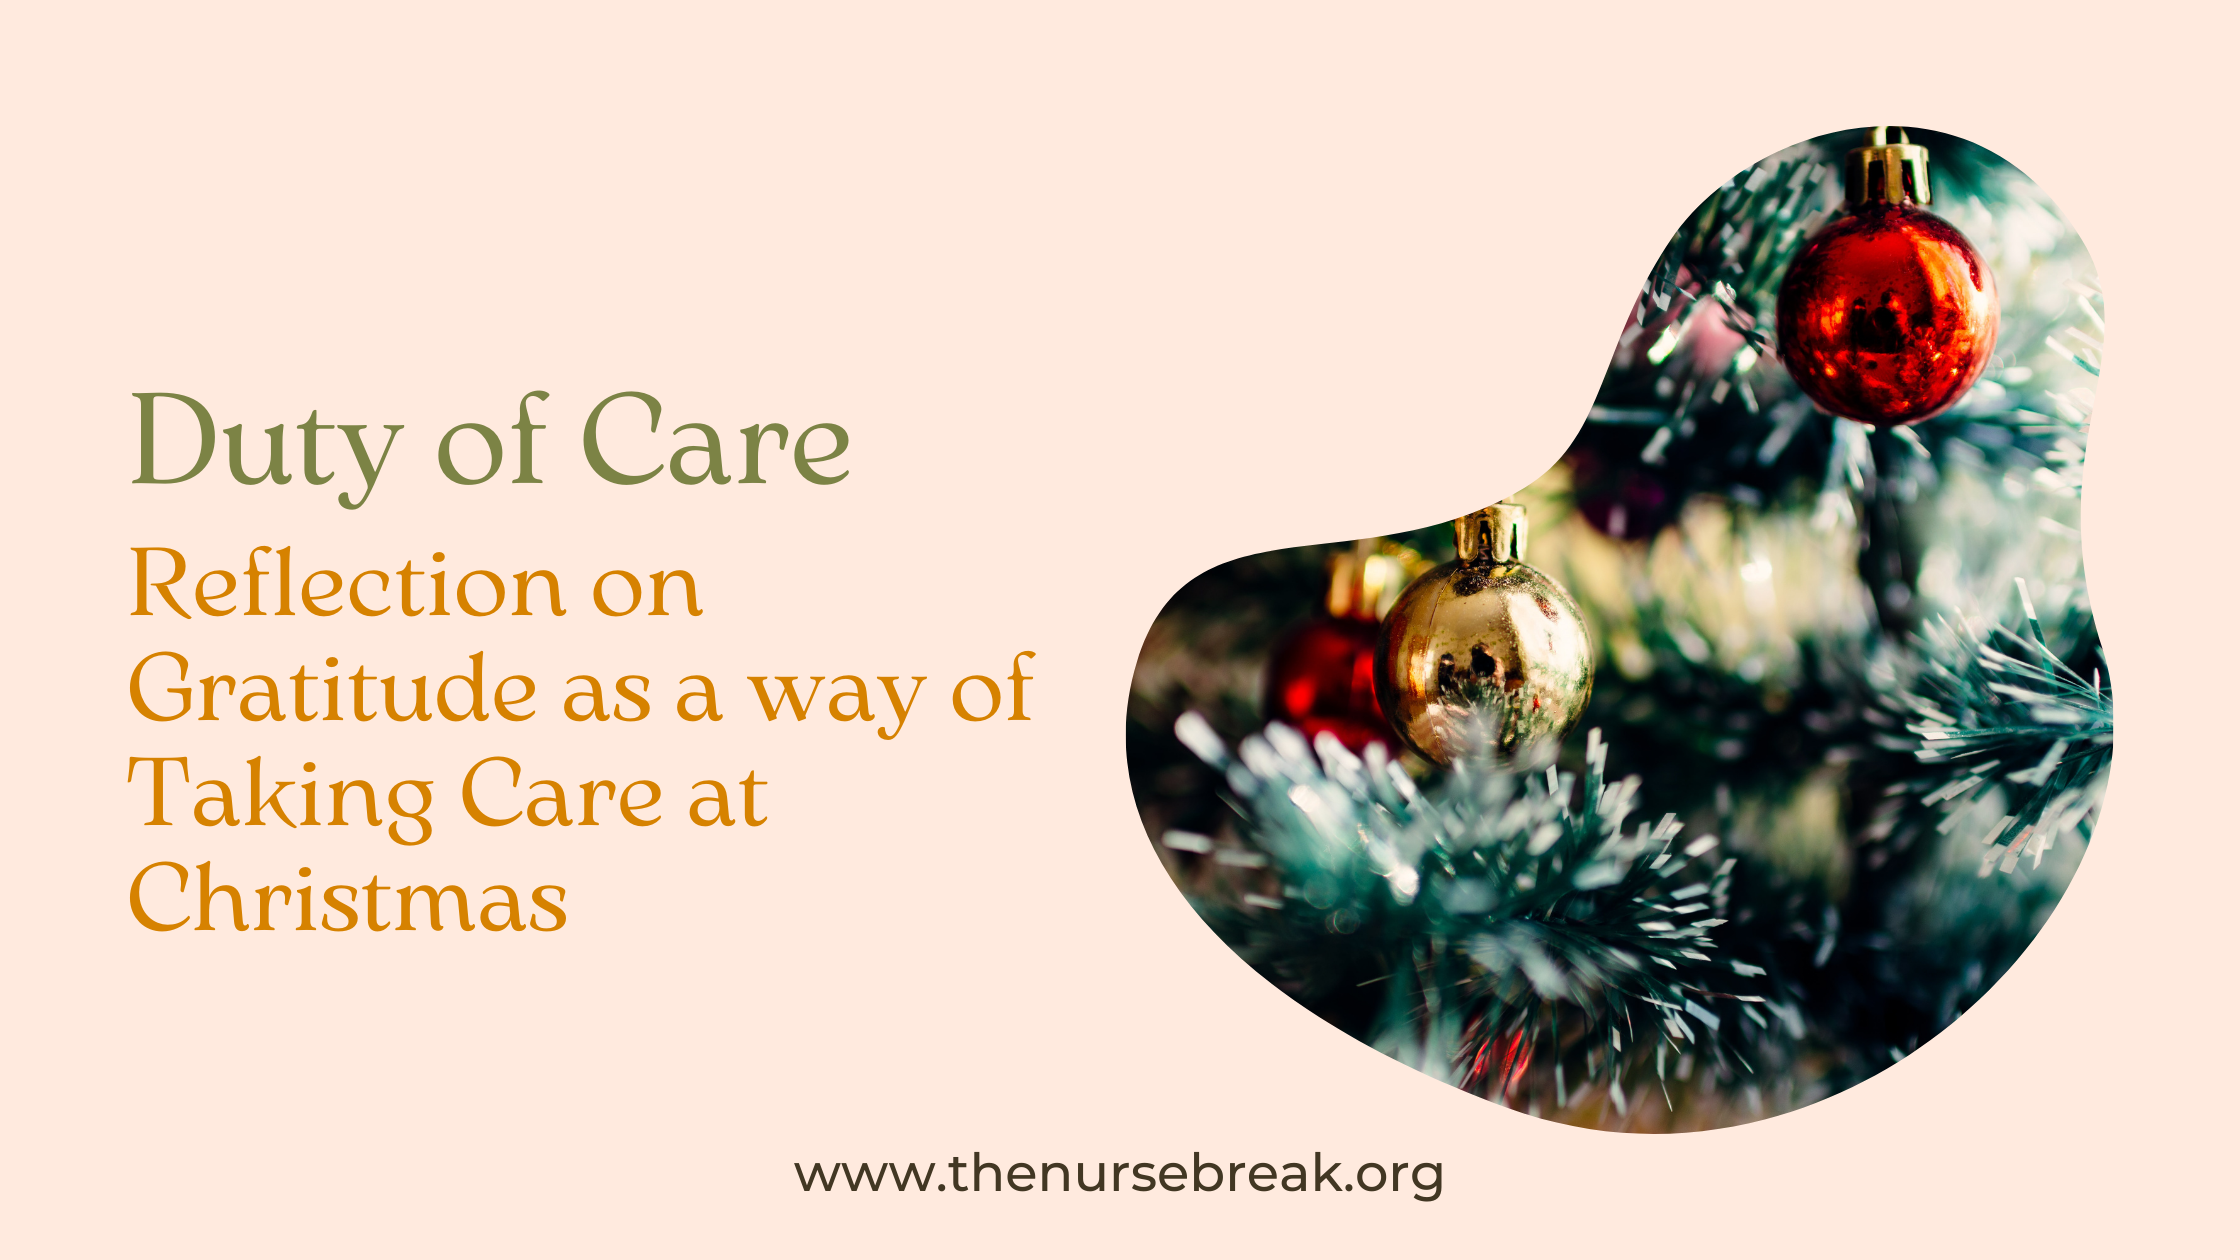 Reflection on Gratitude as a way of Taking Care at Christmas